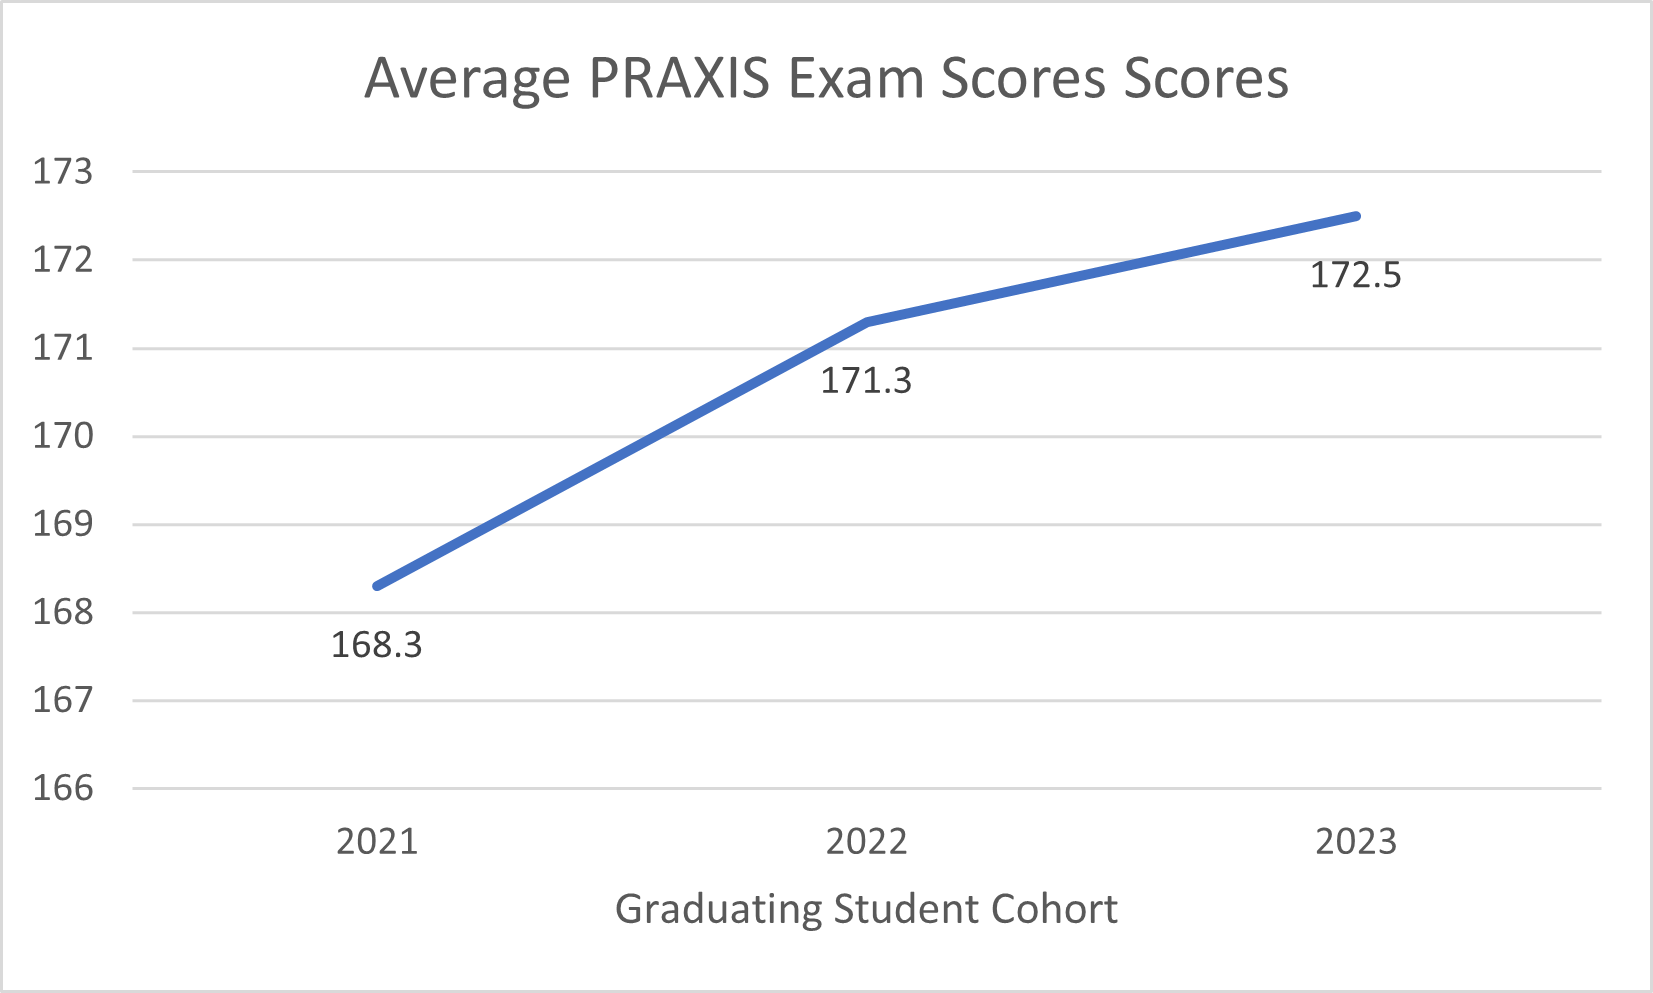 Graph of School Psychology Praxis scores showing increase over time